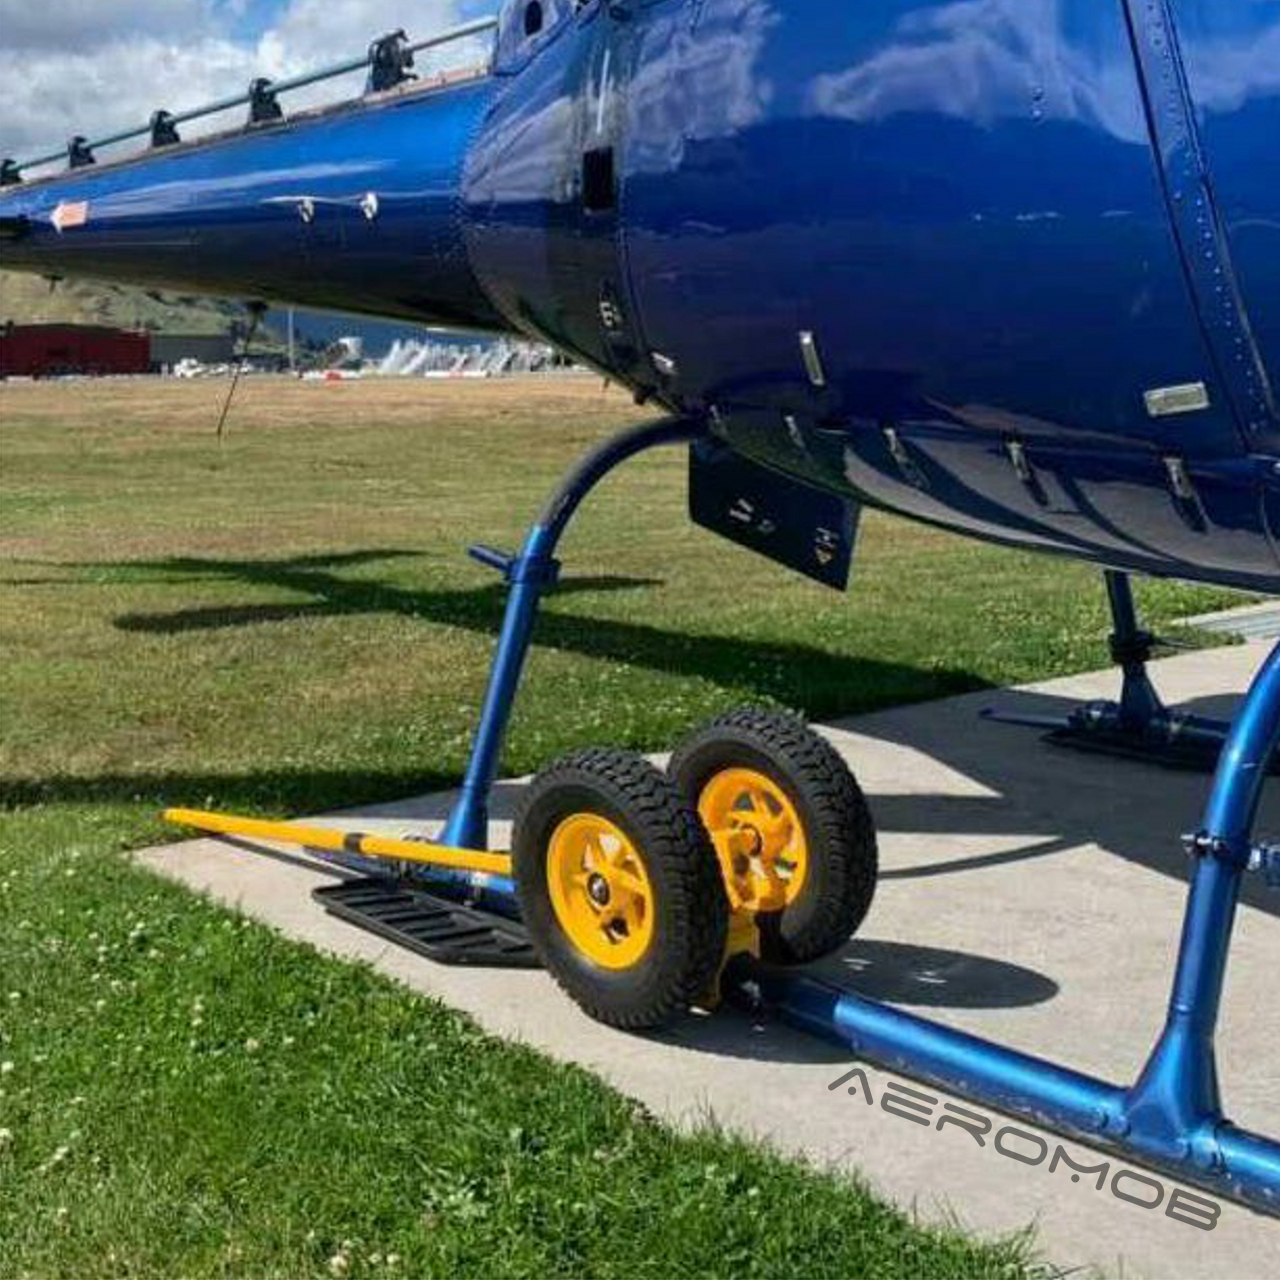 Aeromob AS350 Helicopter Ground Handling Wheels